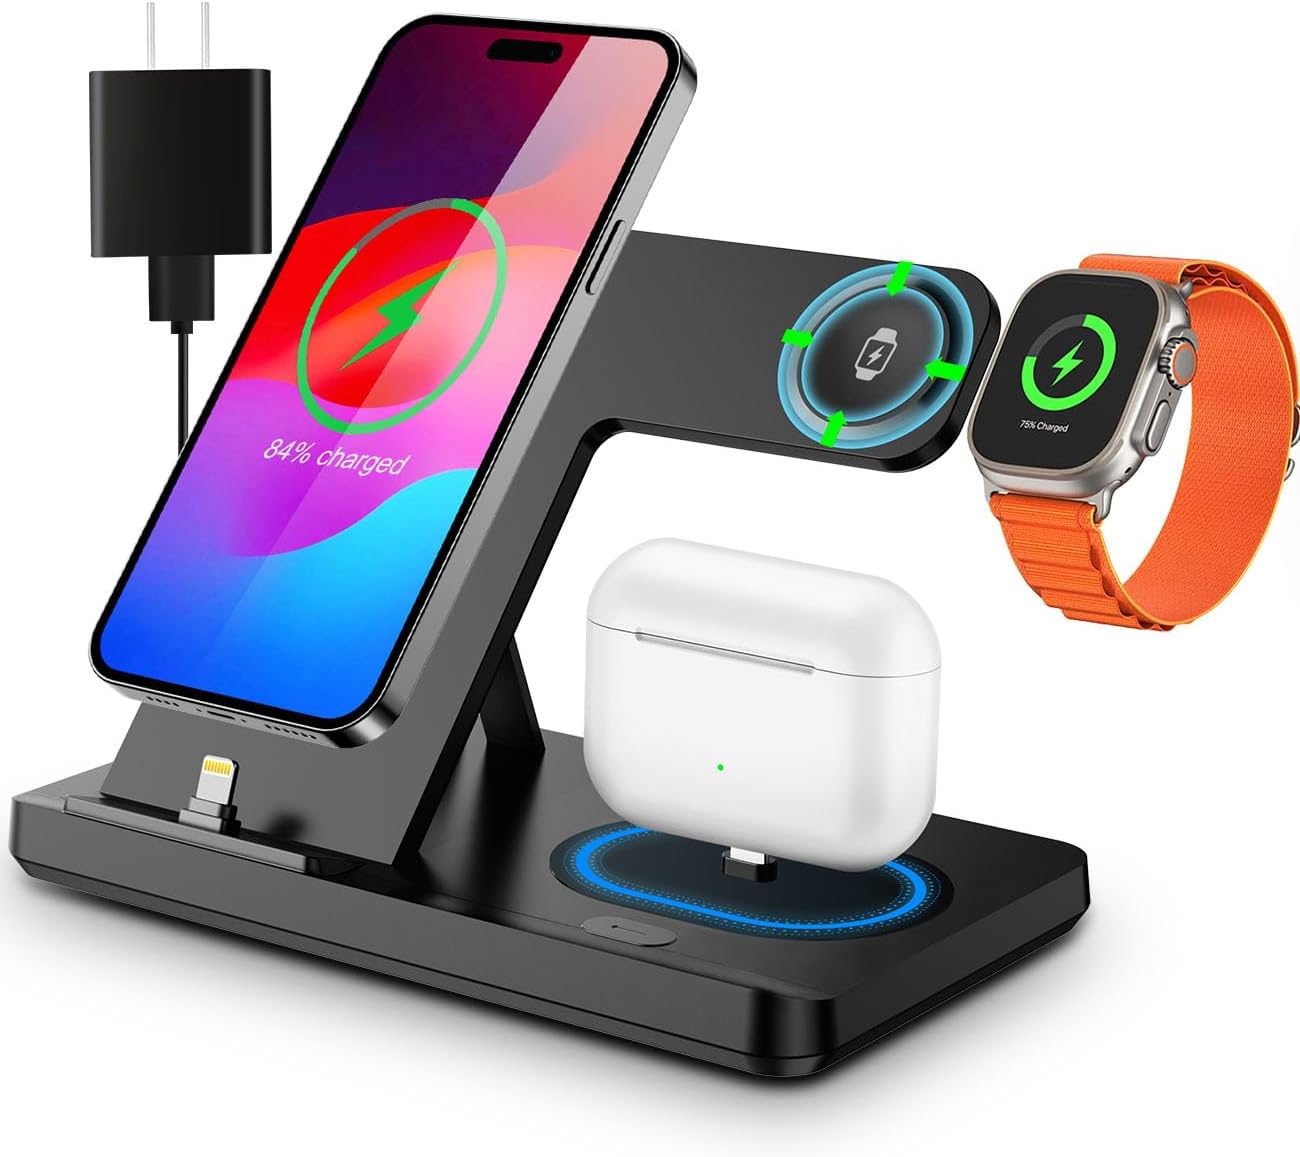 It does require you to plug the wire in for it to charge your devices so its not wireless. However I love the idea it charges all of my 3 devices in 1 setting, iPhone, iWatch, and my ear pods. Does come with a night green light to turn on. Overall, good product to have, needs some improvements however.